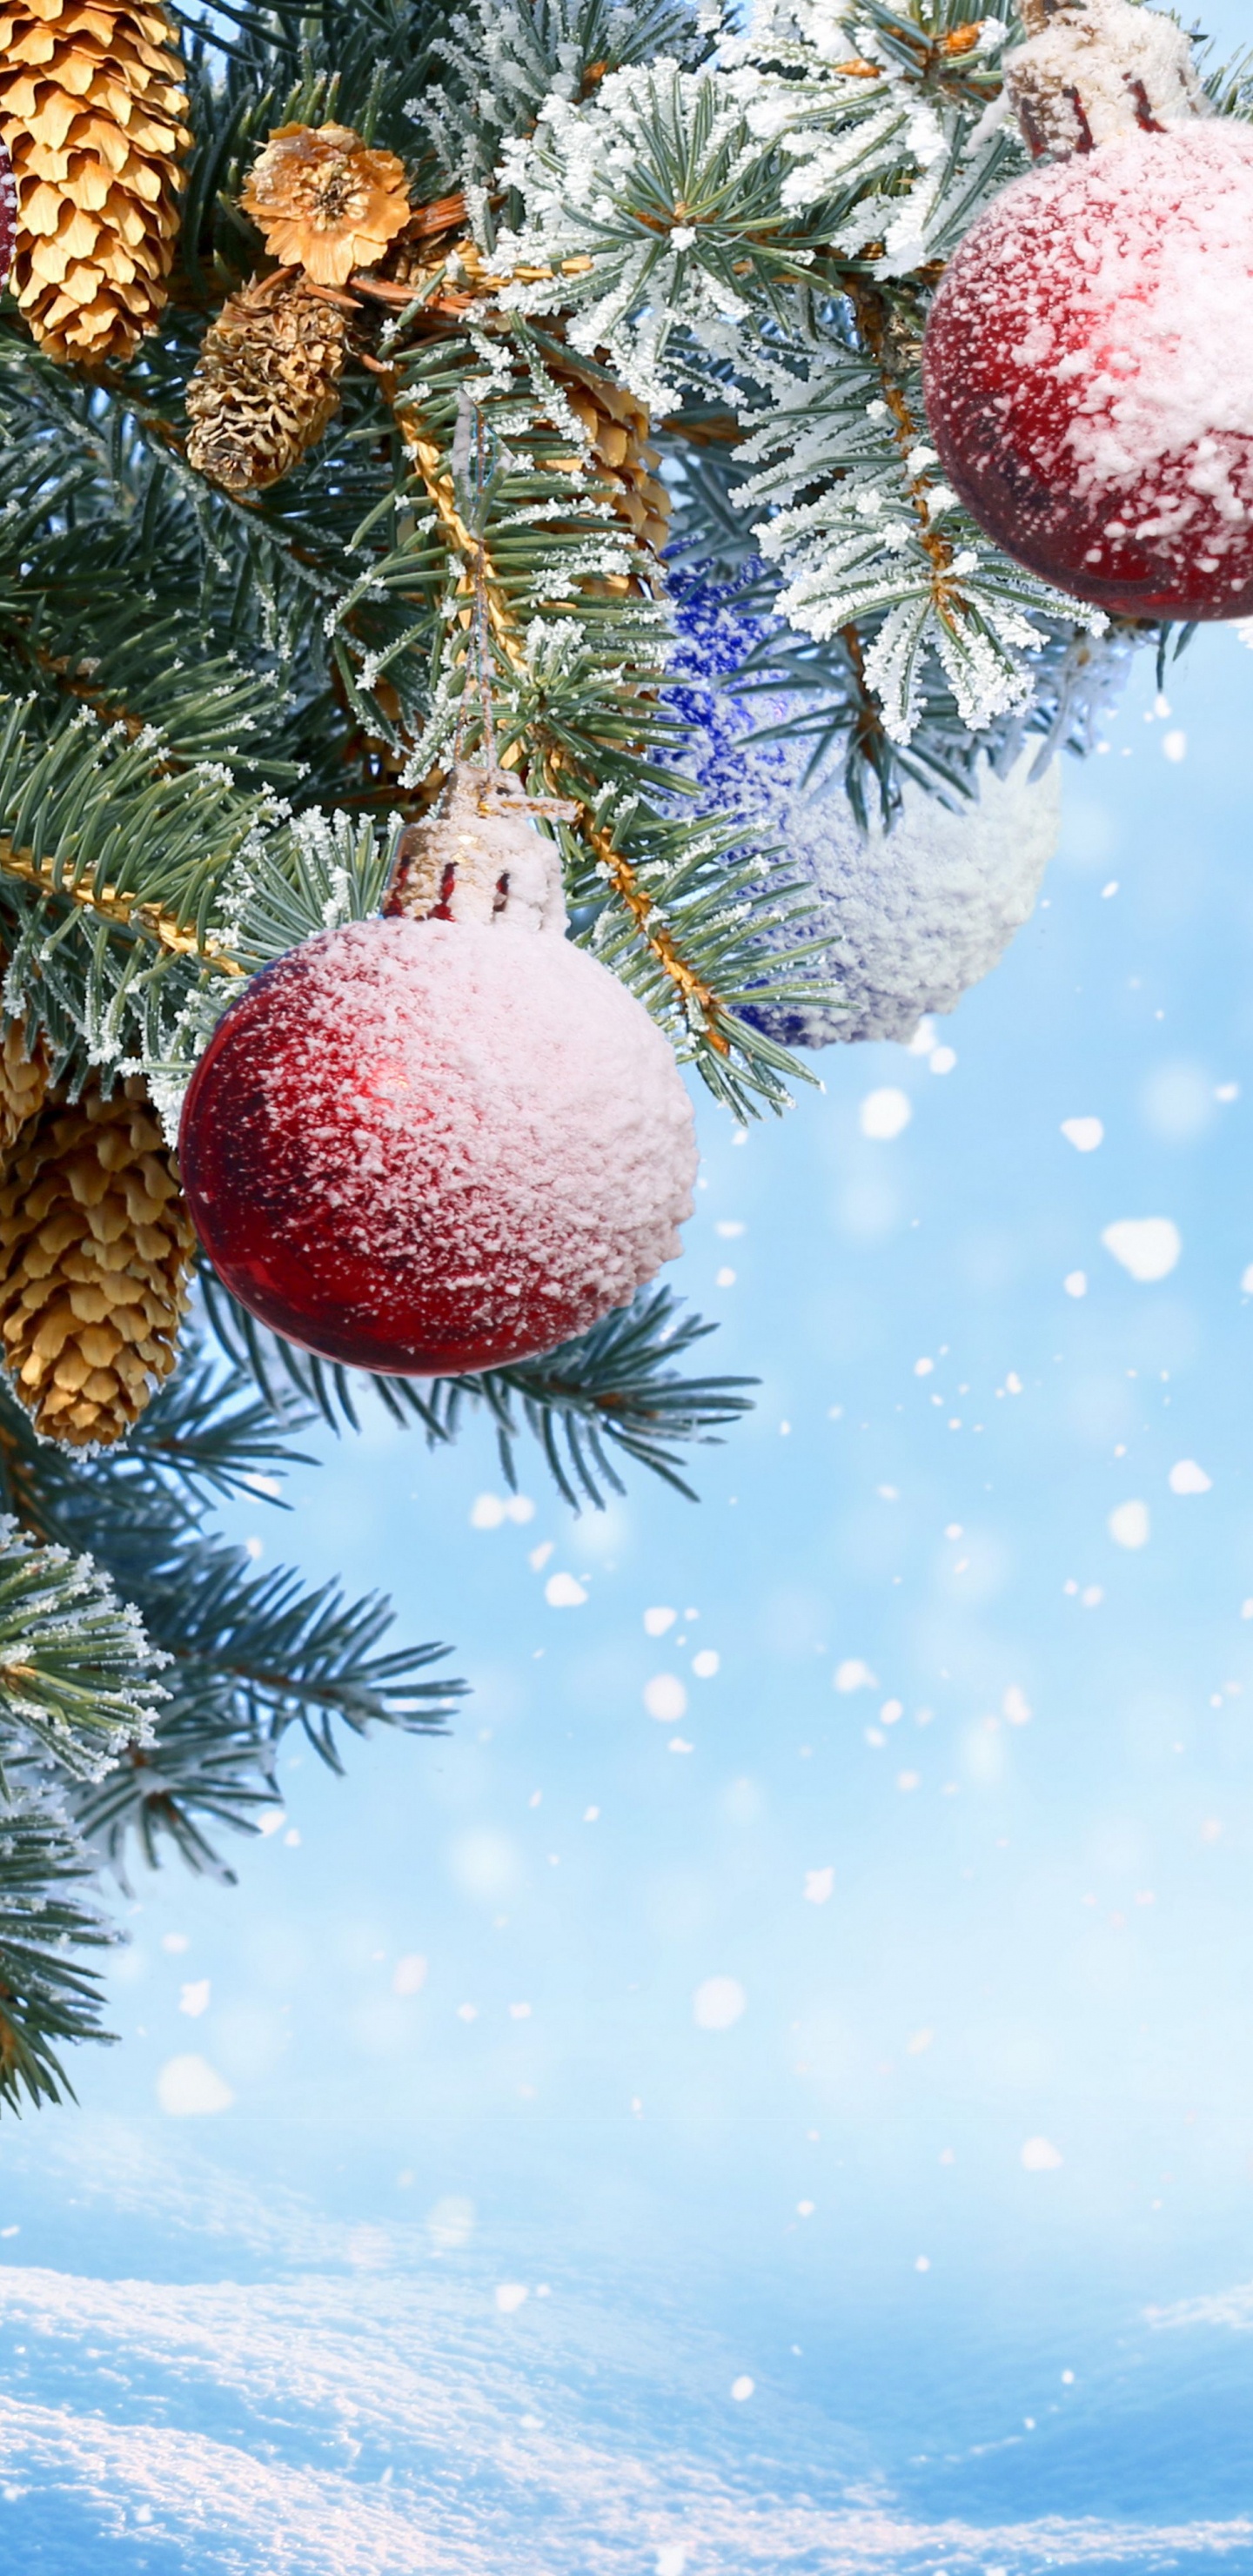 New Year, Christmas Day, Christmas Ornament, Tree, Fir. Wallpaper in 1440x2960 Resolution